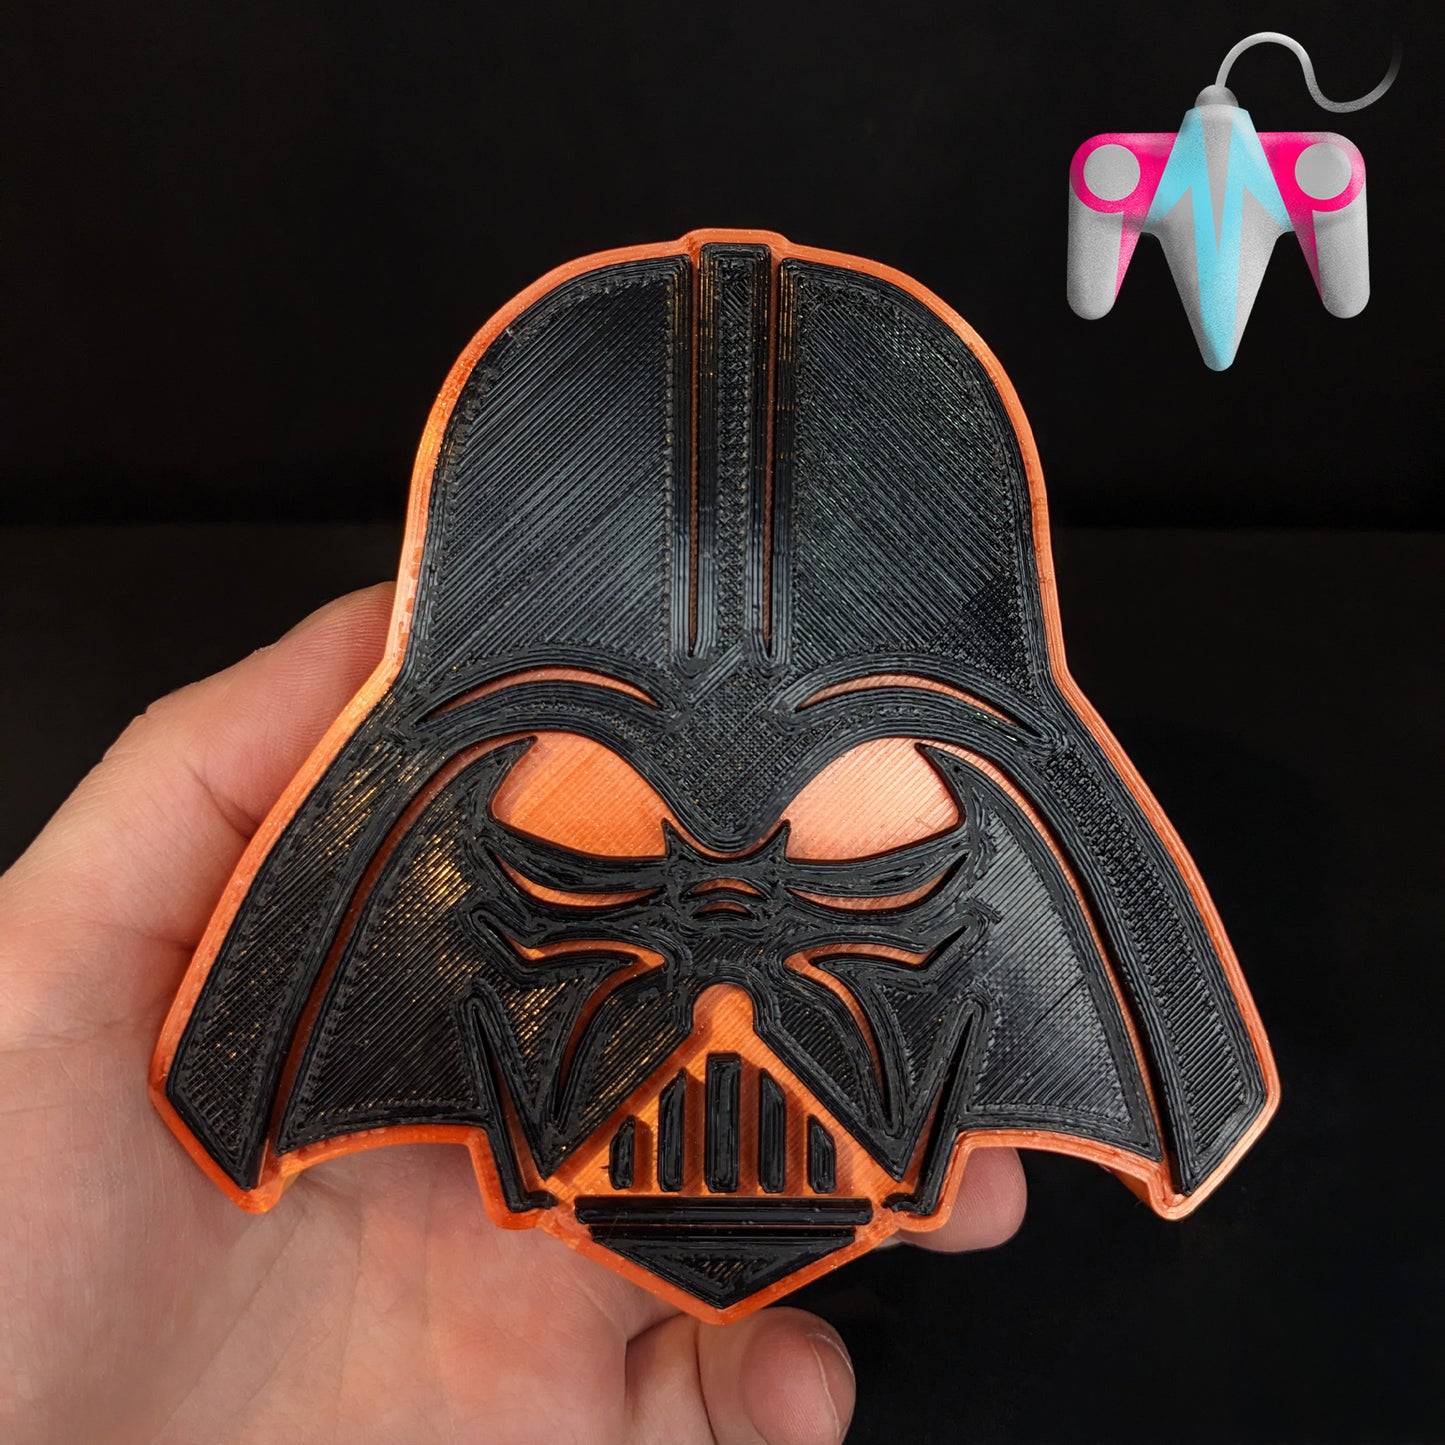 3D Printed Sith Lord Plaque Wall/Shelf Decor (FREE SHIPPING)